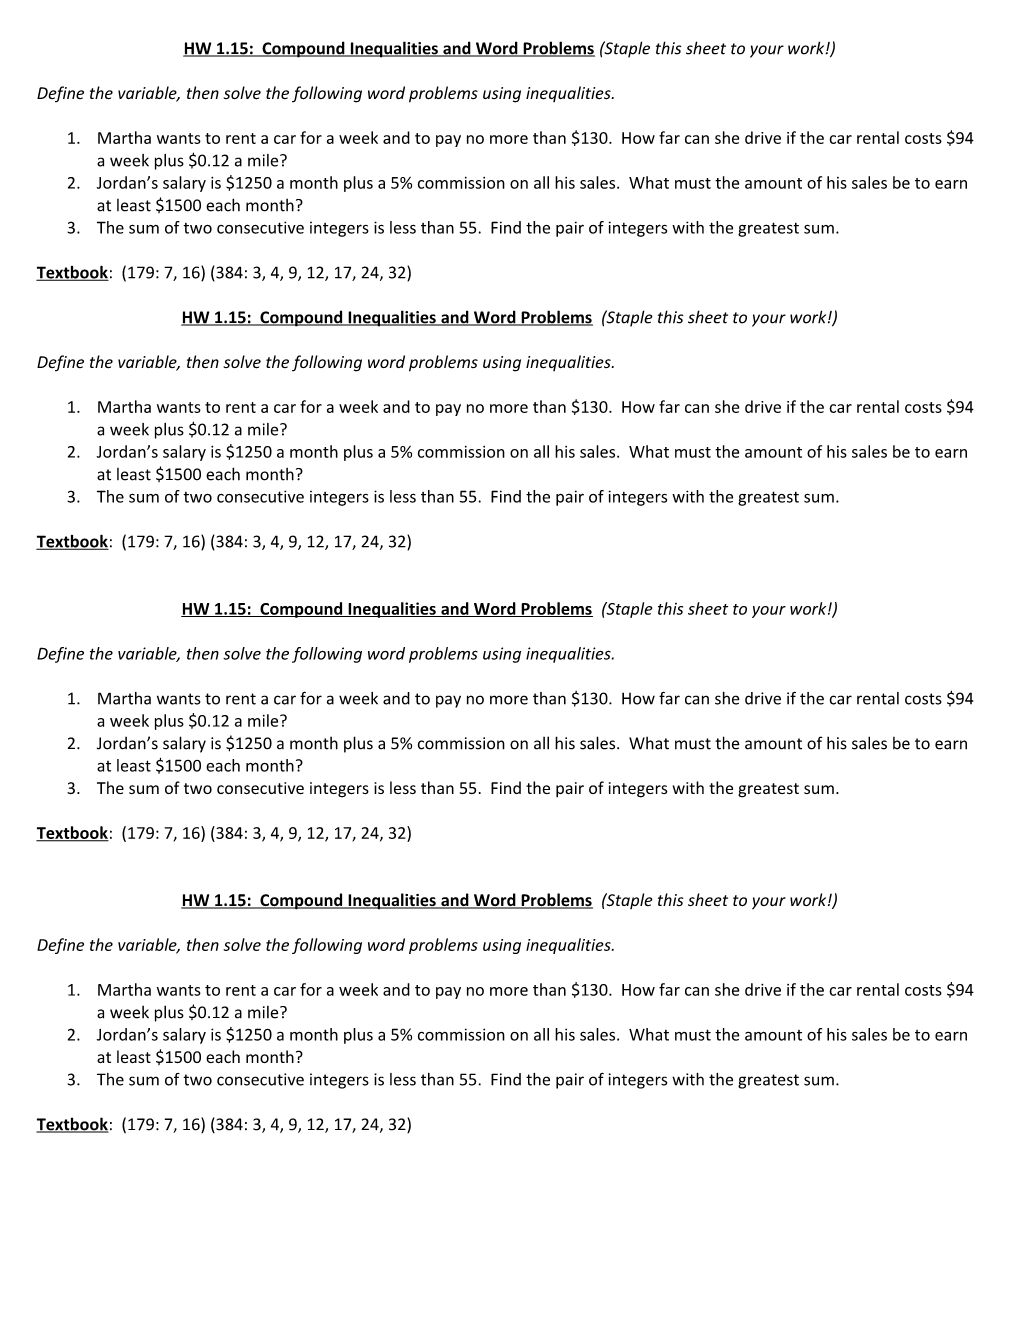 HW 1.15: Compound Inequalities and Word Problems (Staple This Sheet to Your Work!)